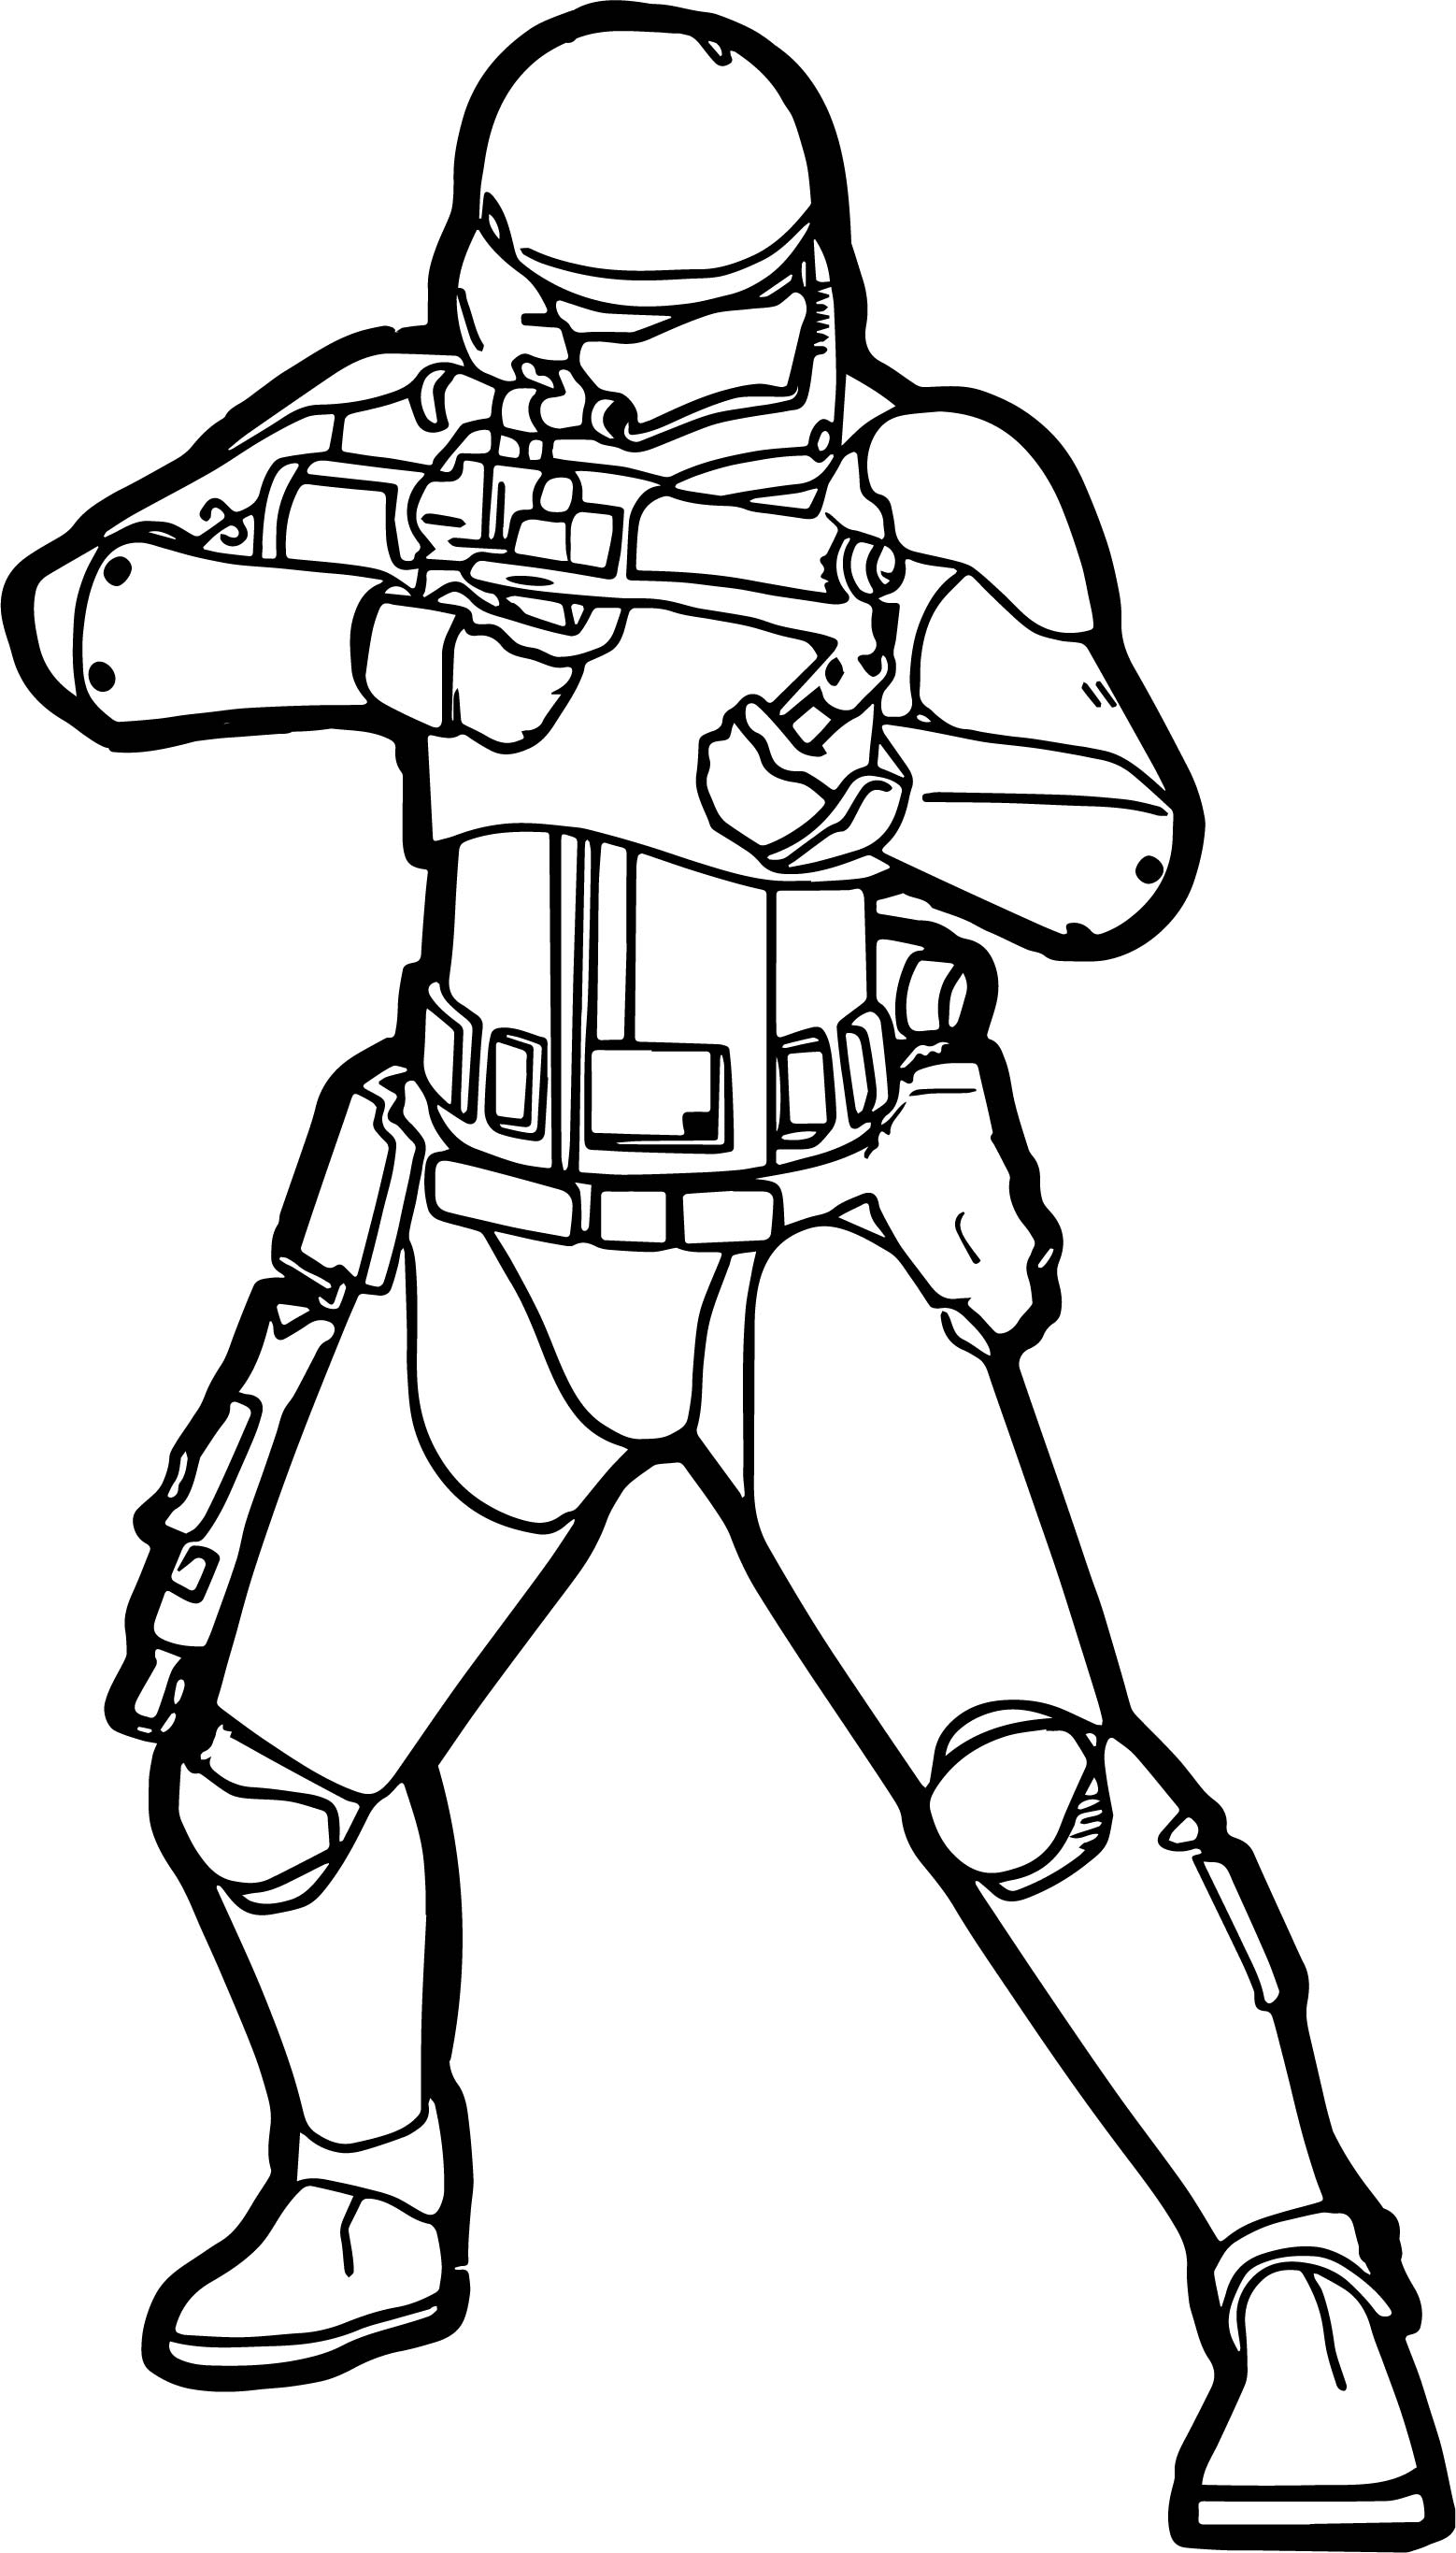 Stormtrooper Coloring Page at GetColorings.com | Free ...